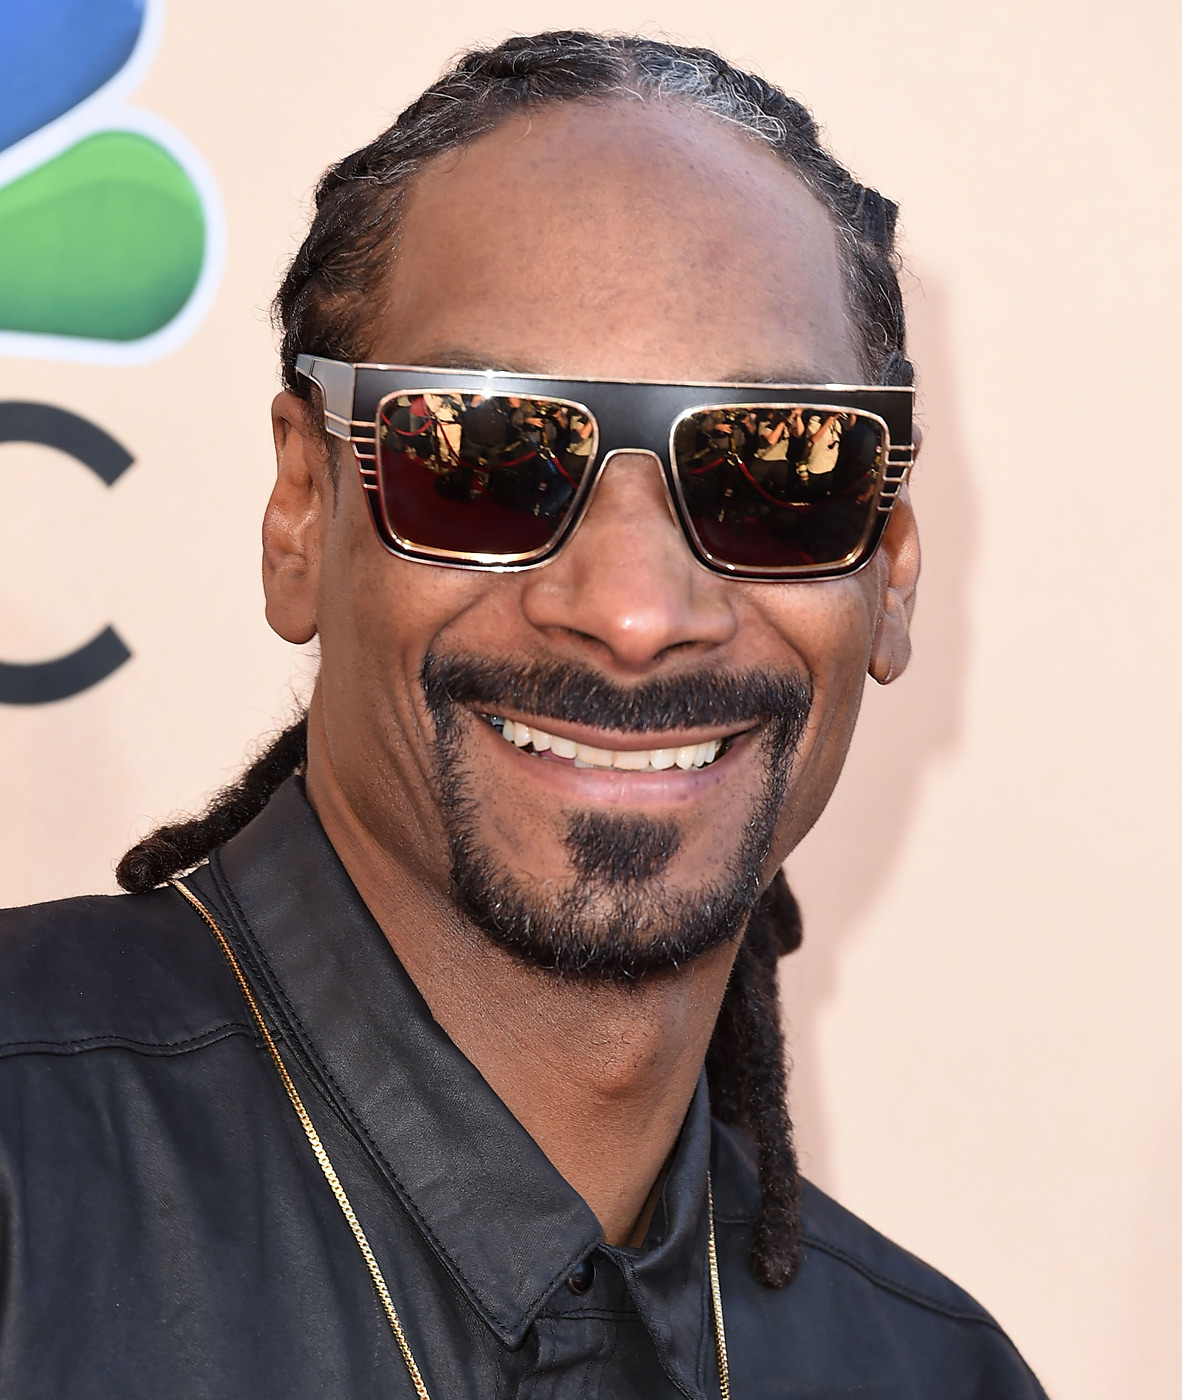 Snoop Dogg arrives at the 2015 iHeartRadio Music Awards at The Shrine Auditorium on March 29, 2015 in Los Angeles, Calif. (Steve Granitz—WireImage/Getty Images)